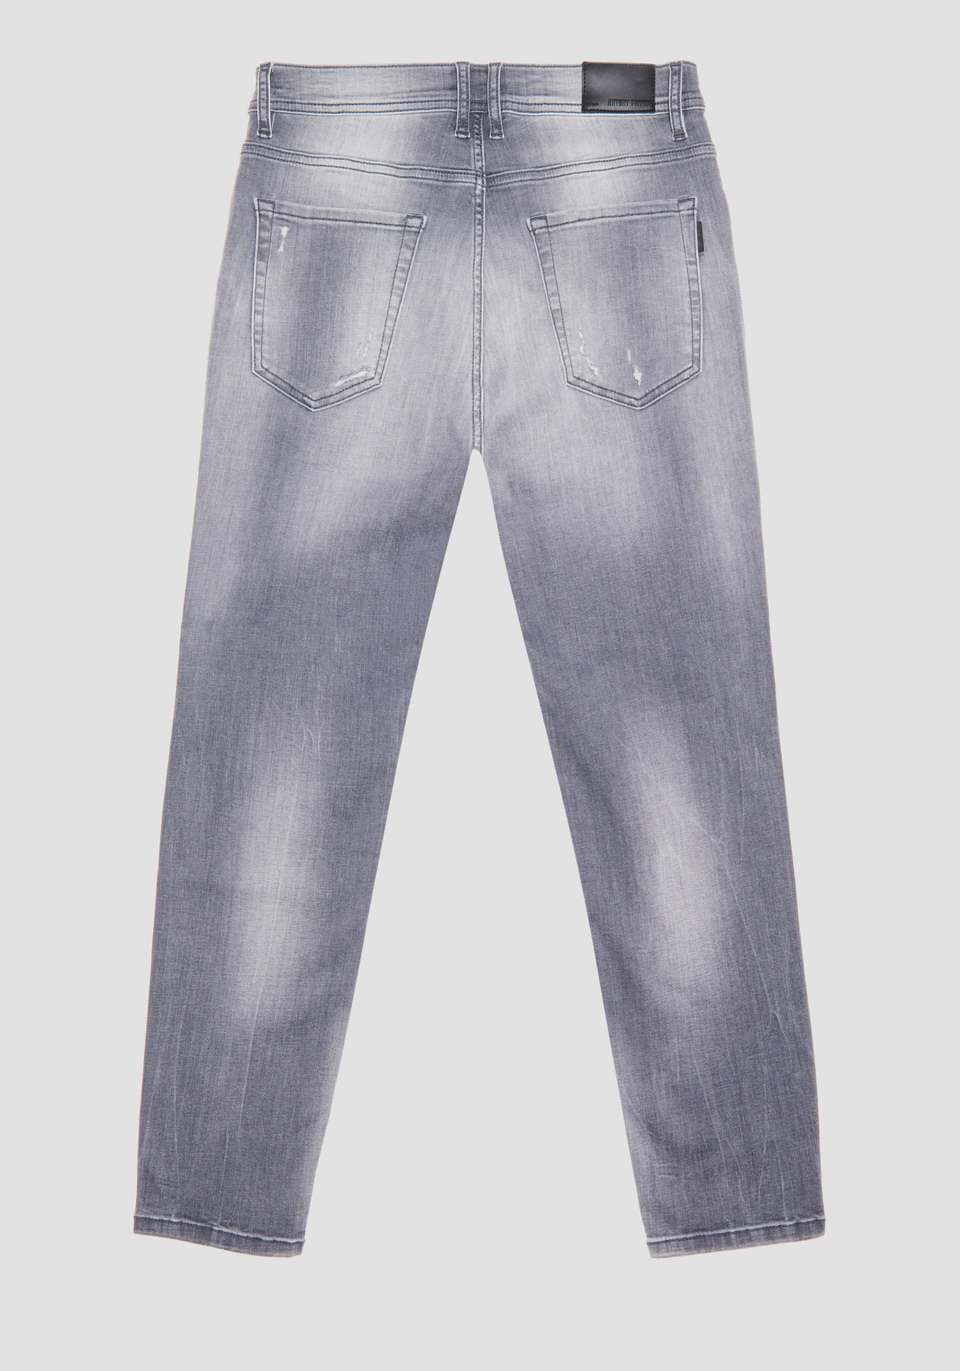 "KARL" CROPPED SKINNY FIT JEANS IN STRETCH DENIM WITH STONE WASH - Antony Morato Online Shop